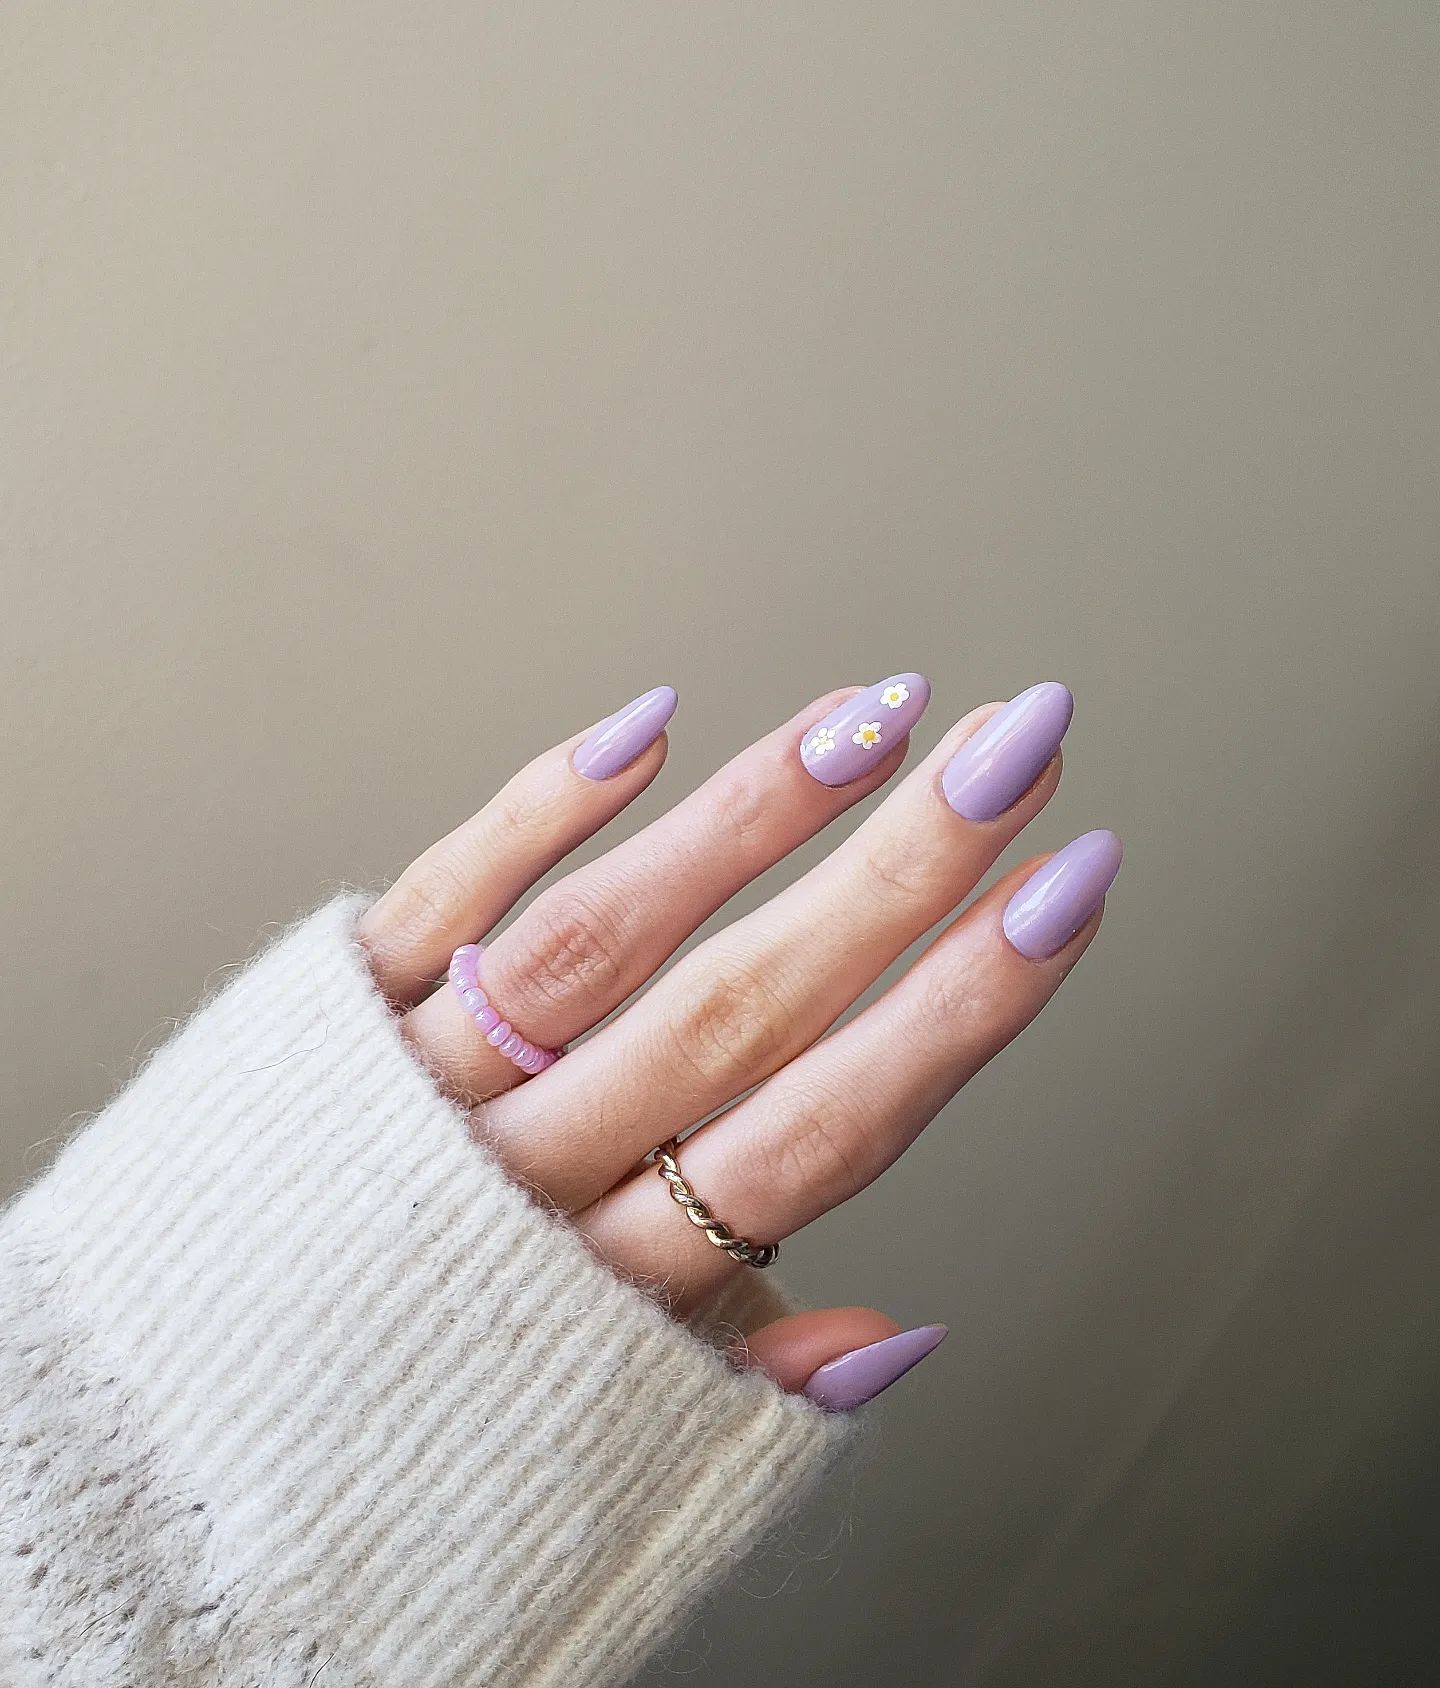 Who doesn't want to wear an optimistic and uplifting color? Then, you should definitely wear a lilac nail polish with a white daisy accent nail.